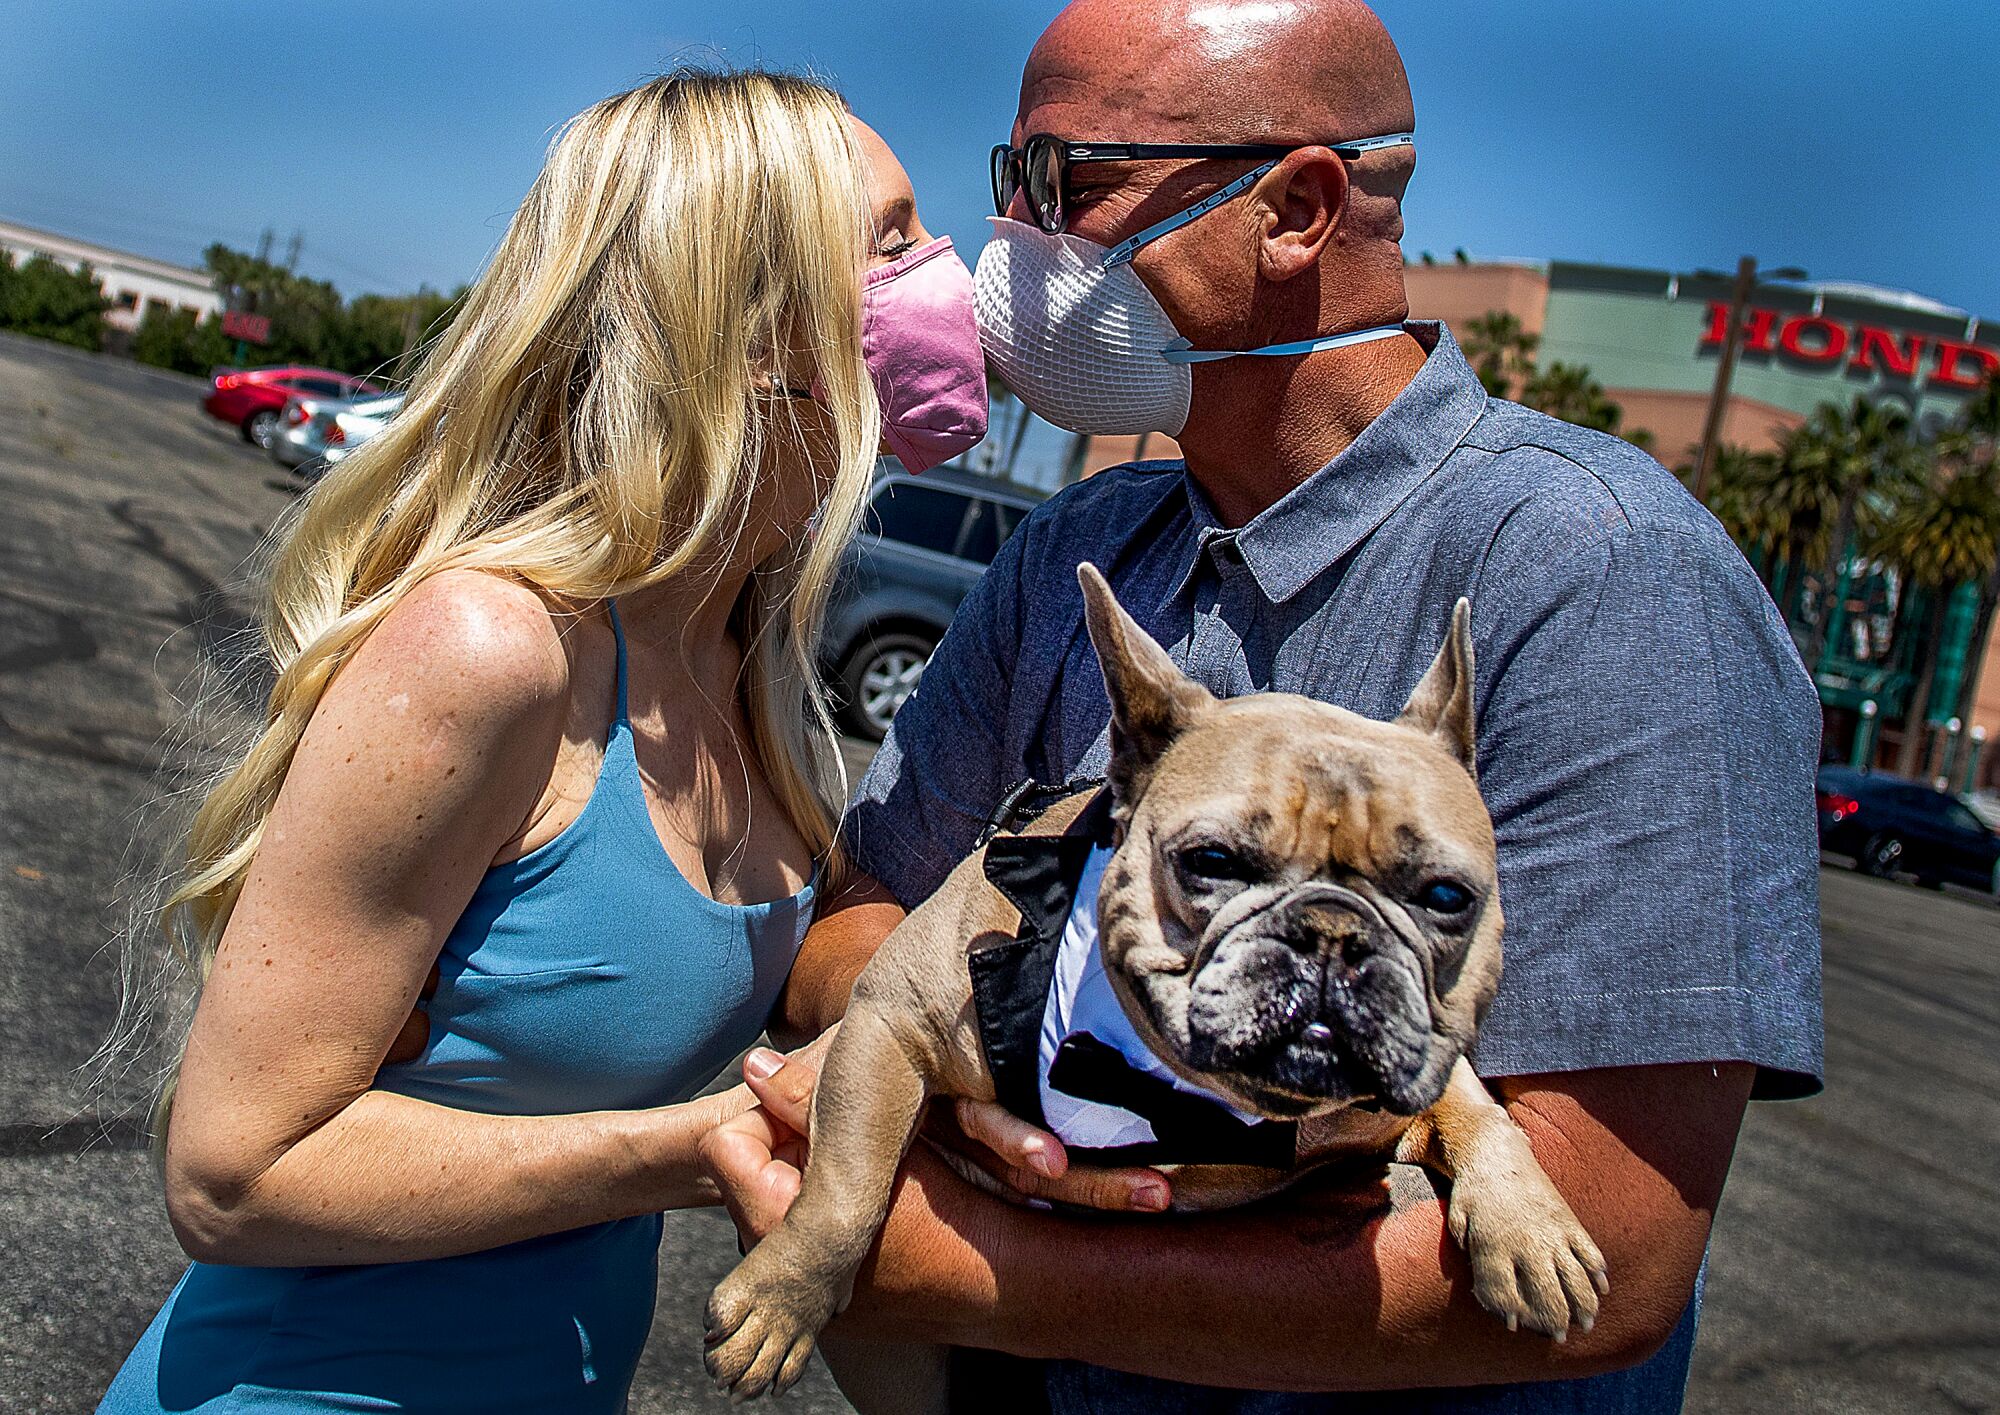 CALIFORNIA, USA: Chad Robbins and Tracey Robbins (R) kiss wearing face masks and holding their dog Huggy after their wedding ceremony officiated by a clerk recorder at the Honda Center parking lot on April 21, 2020 in Anaheim, California. - The County of Orange Clerk Recorder employees implemented a variety of social distancing techniques to safely issue licenses and marry couples during the novel coronavirus pandemic.